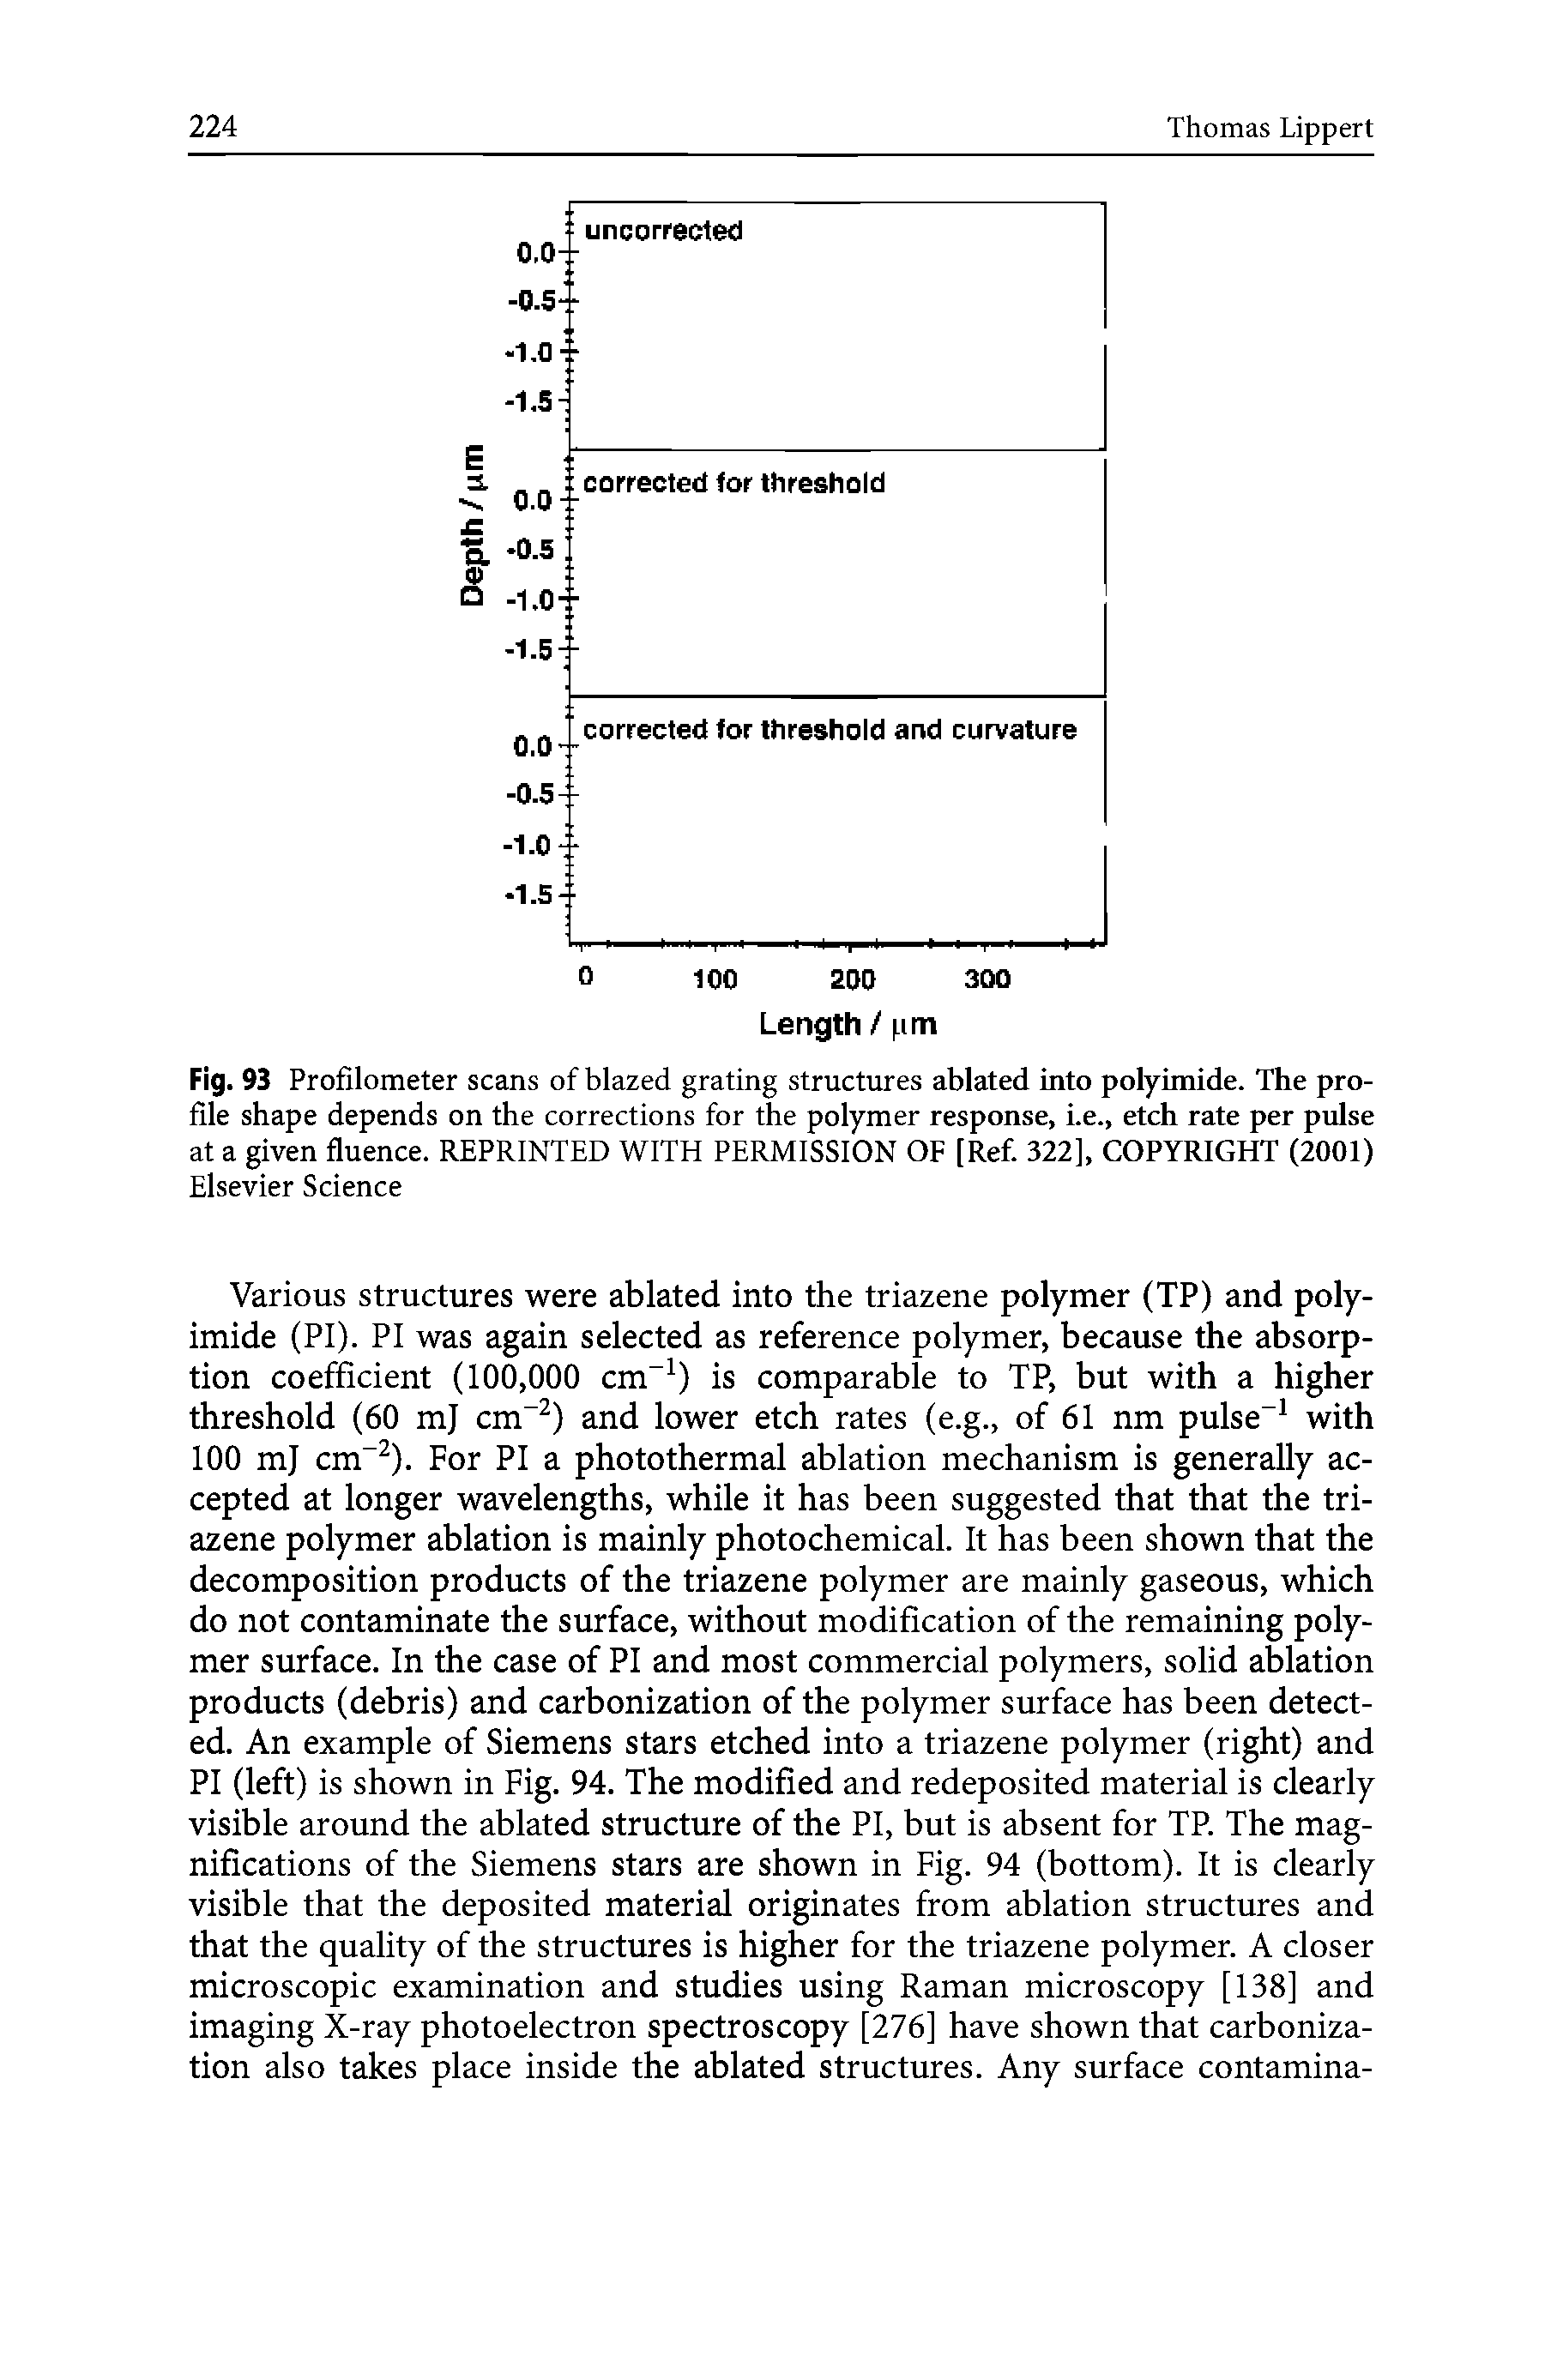 Fig. 93 Profilometer scans of blazed grating structures ablated into polyimide. The profile shape depends on the corrections for the polymer response, i.e., etch rate per pulse at a given fluence. REPRINTED WITH PERMISSION OF [Ref. 322], COPYRIGHT (2001) Elsevier Science...